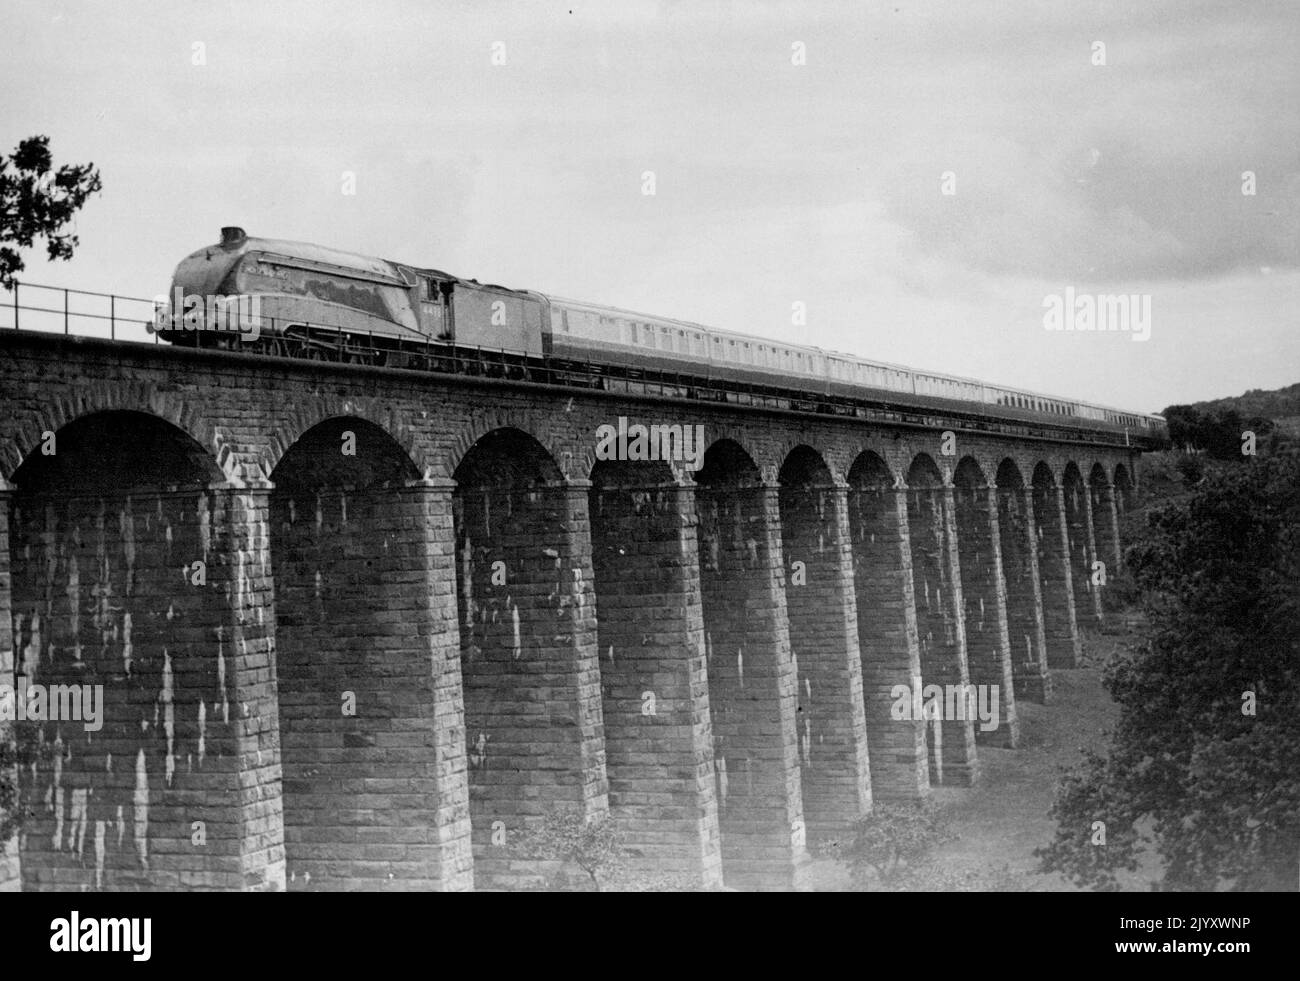 L. N. E. R. Coronation Train's Trial Run - The London & North Eastern Railways a new blue and white, streamlined 'Coronation' express roaring over the Eighteen Arches Viaduct across the River Aln, Northumberland, yesterday on her first trial run from London to Edinburgh, These new 'Coronation' expresses commence service on Monday and will make the Journey between London and Edinburgh in six hours. July 02, 1937. (Photo by Topical Press). Stock Photo